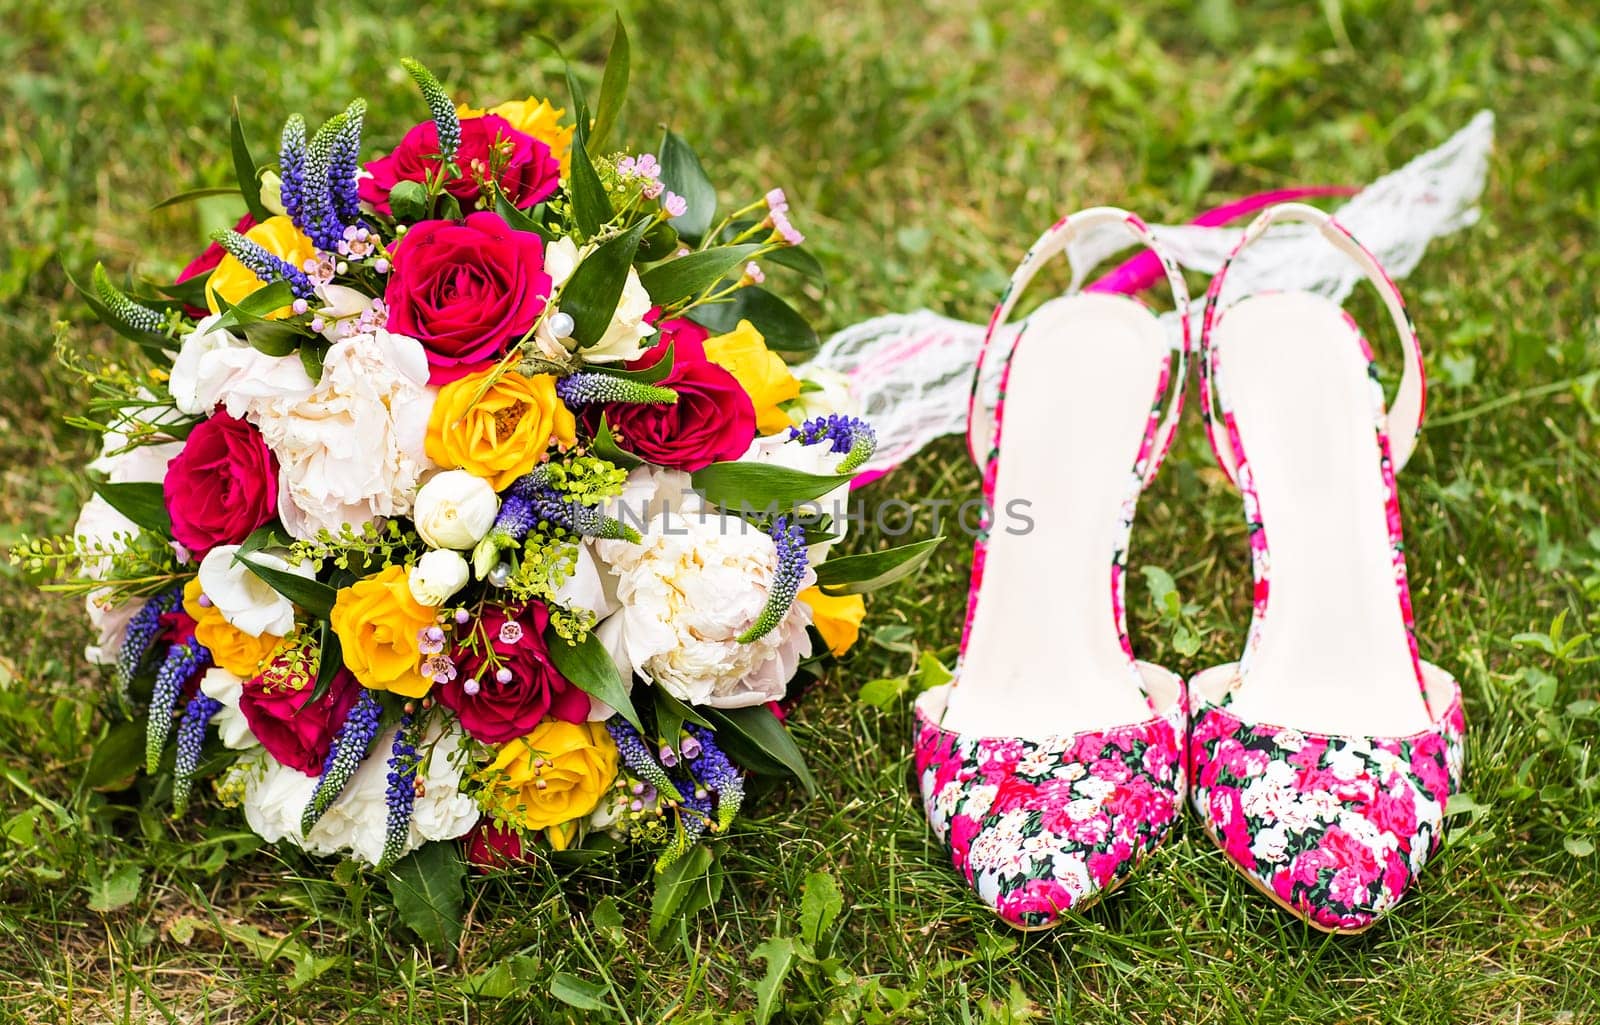 wedding bouquet and shoes on the grass by Satura86